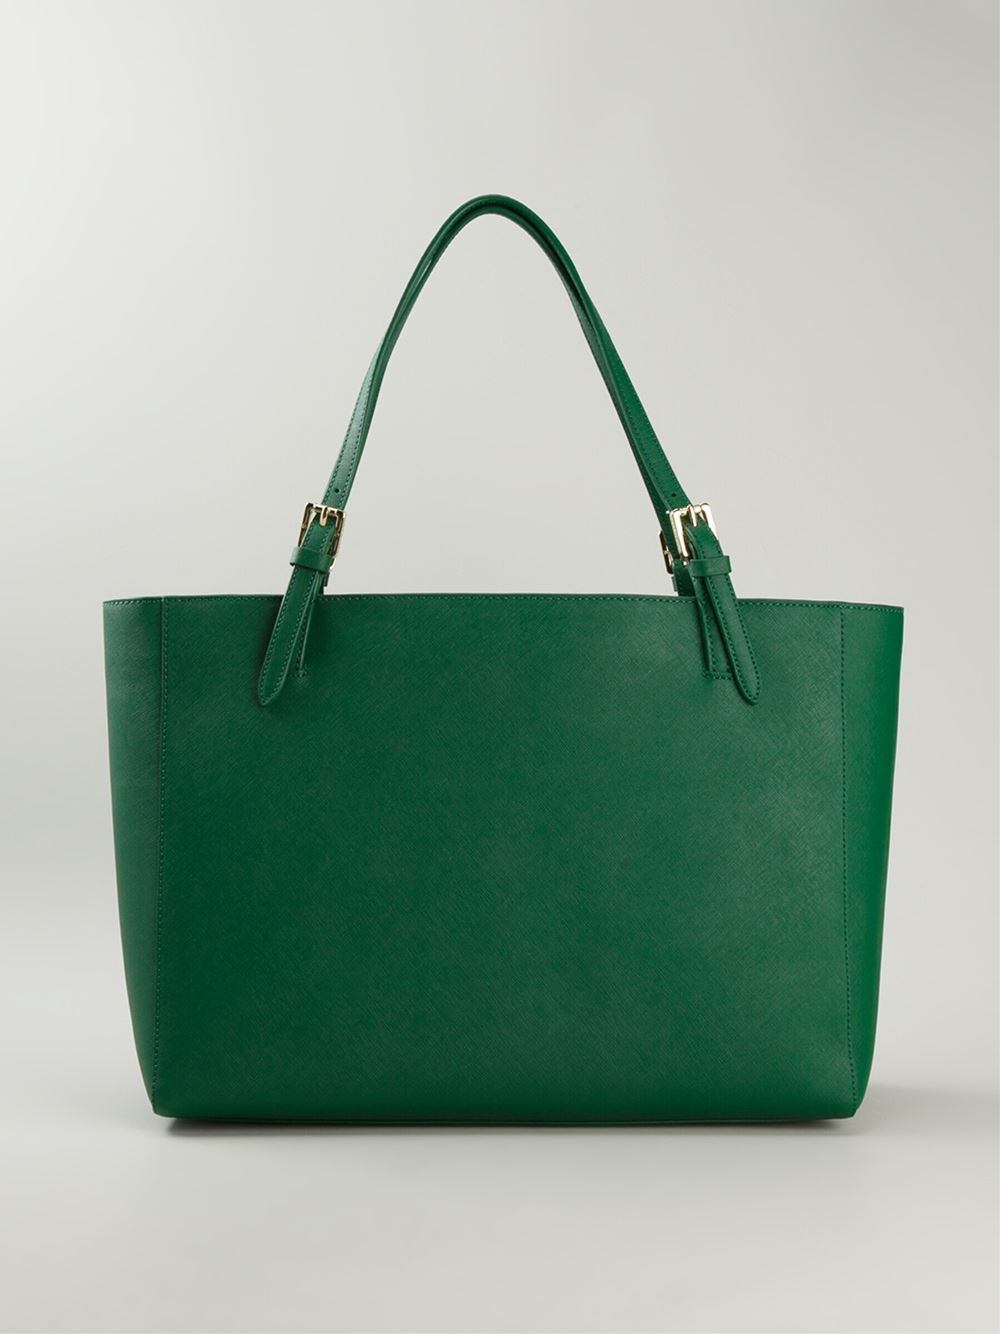 Tory Burch Large 'York' Shopper Tote in Green - Lyst